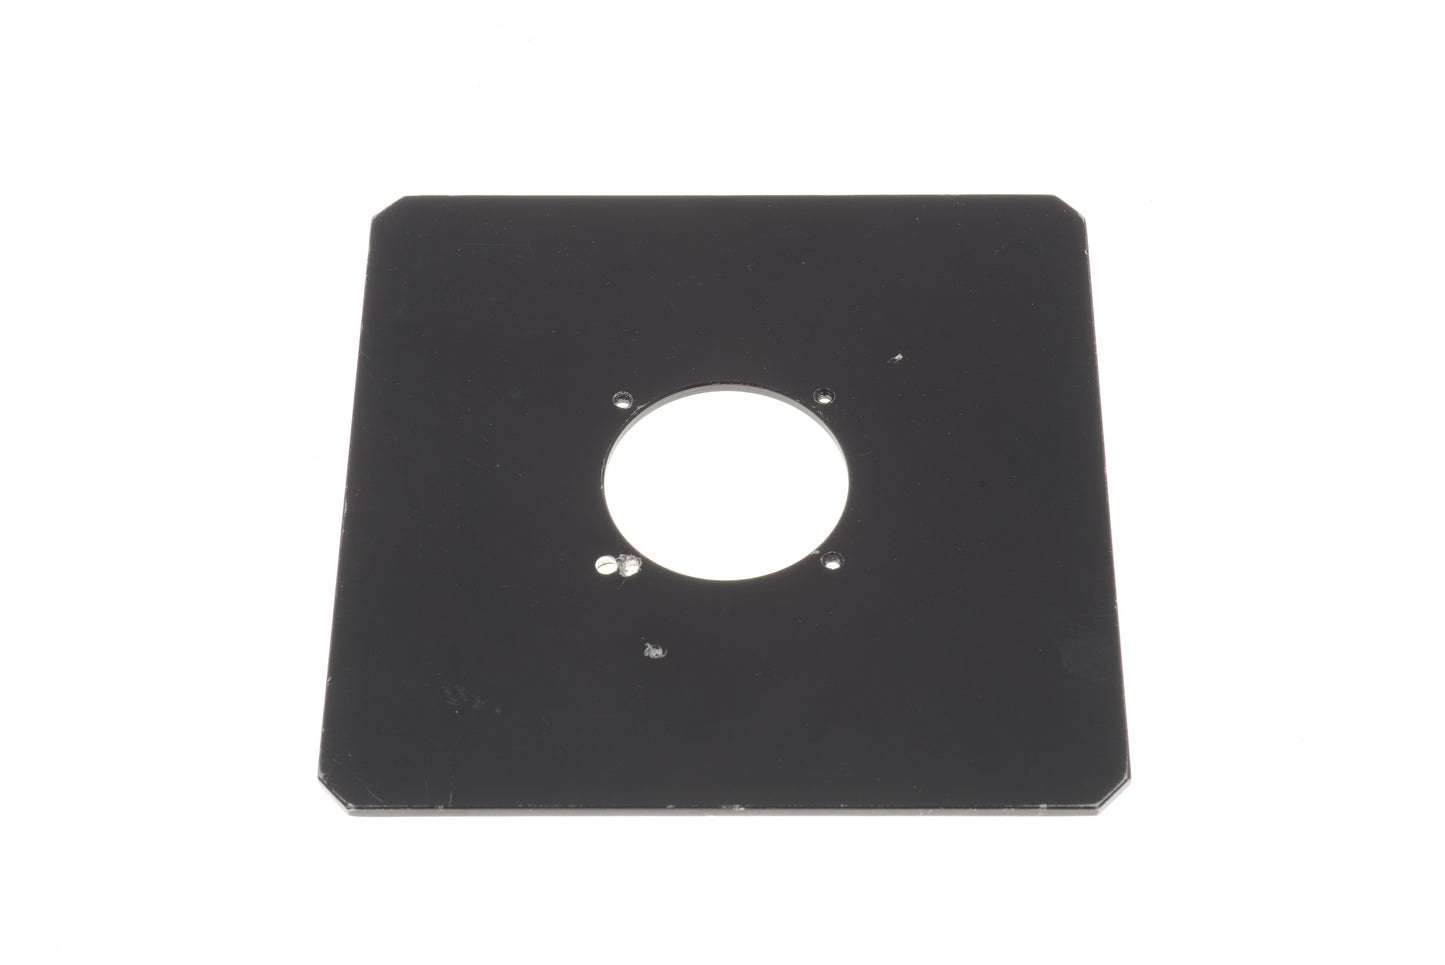 Other Lens Board #1 130mm x 130mm - Accessory